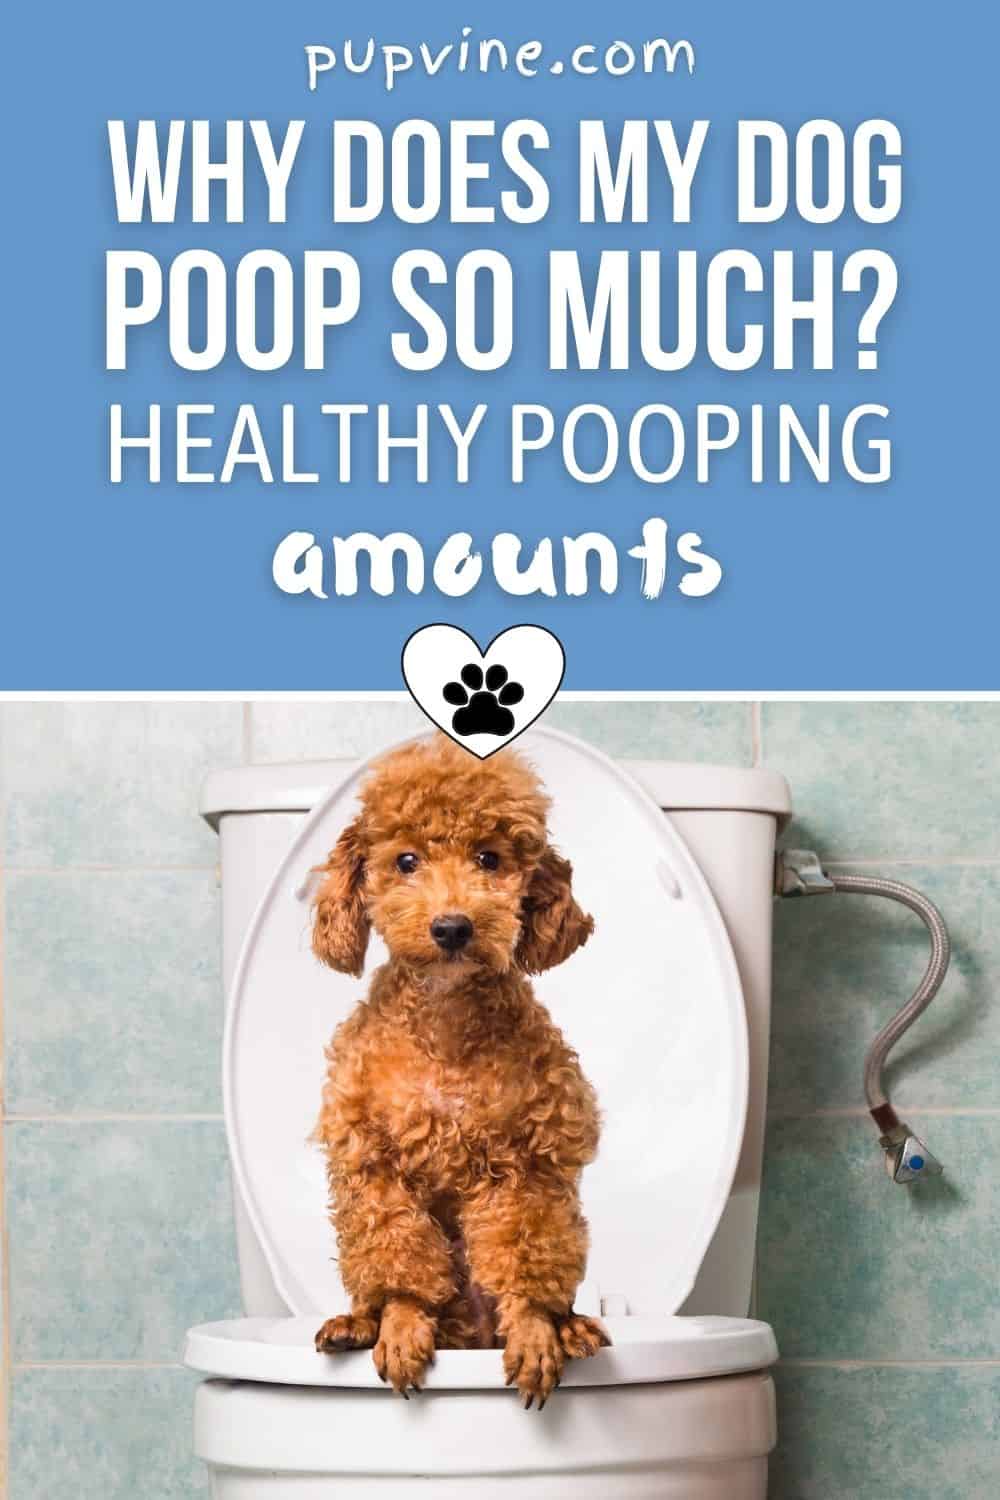 Why Does My Dog Poop So Much? Healthy Pooping Amounts